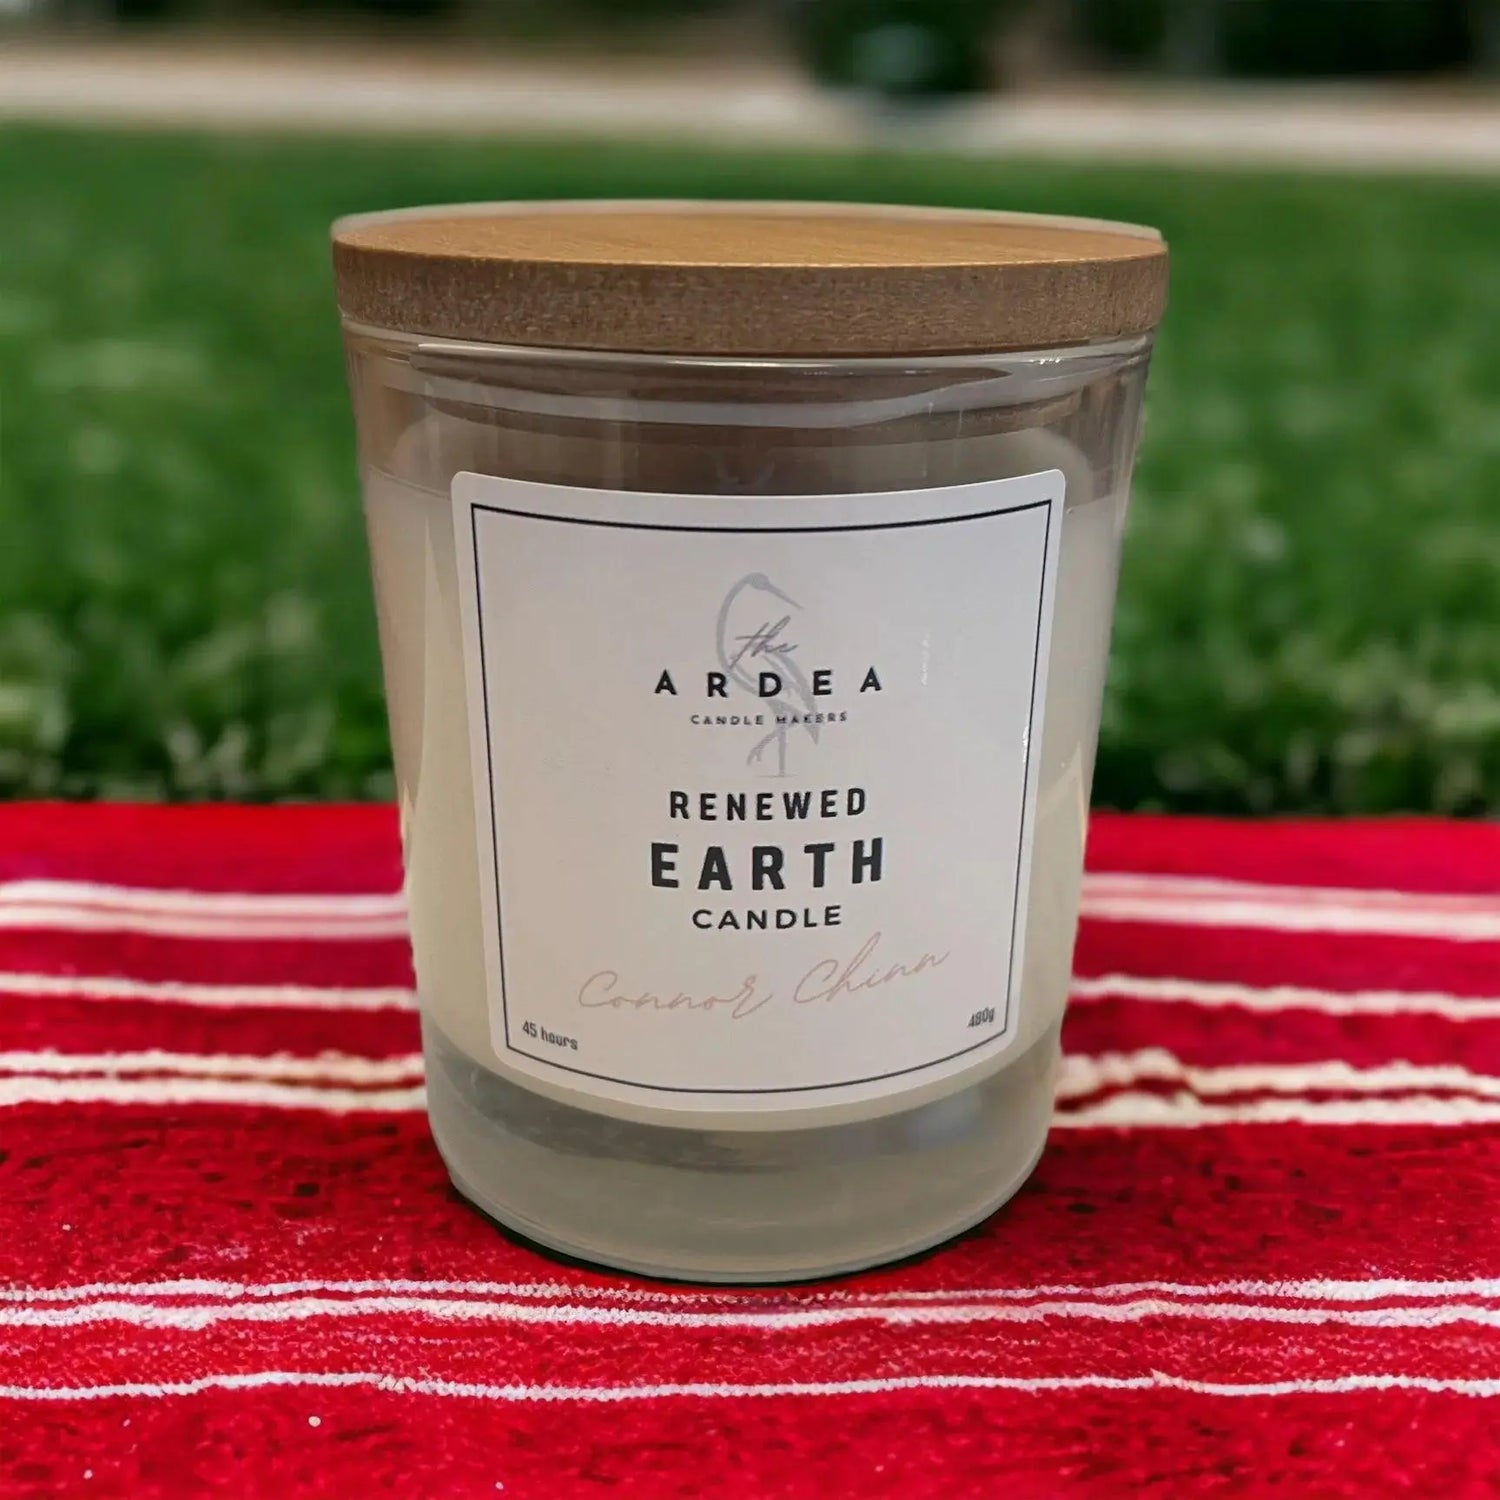 Renewed Earth Candle - 420g - The Ardea Candle Makers